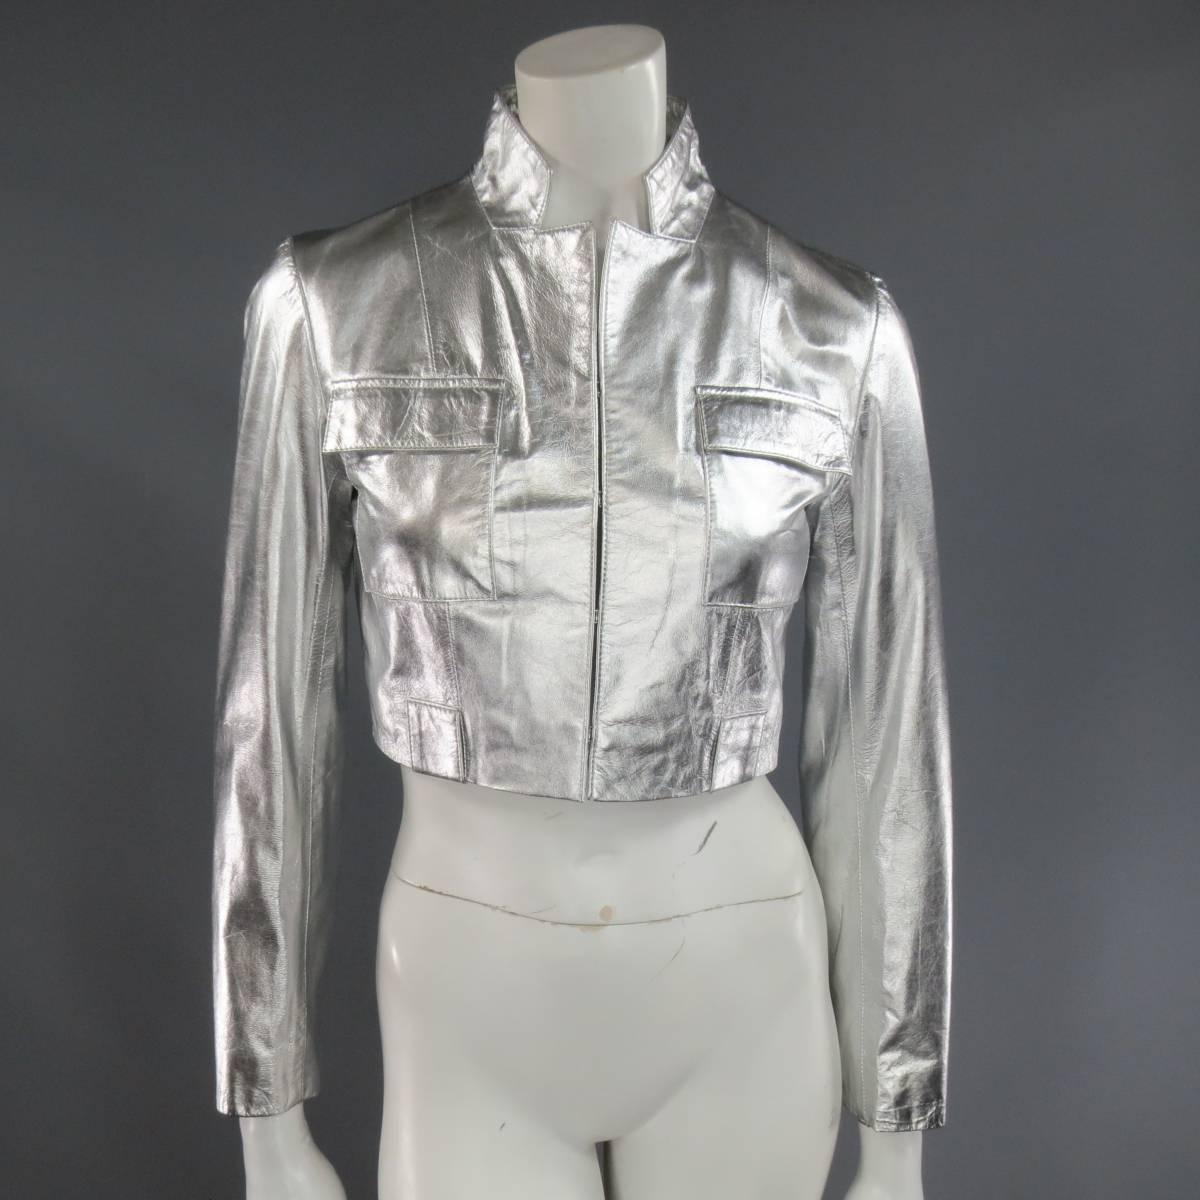 This fabulous RAOUL Fall 2012 collection cropped jacket comes in light weight metallic silver leather and features a slim lapel, hood and eye closures, double breast patch flap pockets, and belt loops.
 
Good Pre-Owned Condition.
Marked: S
